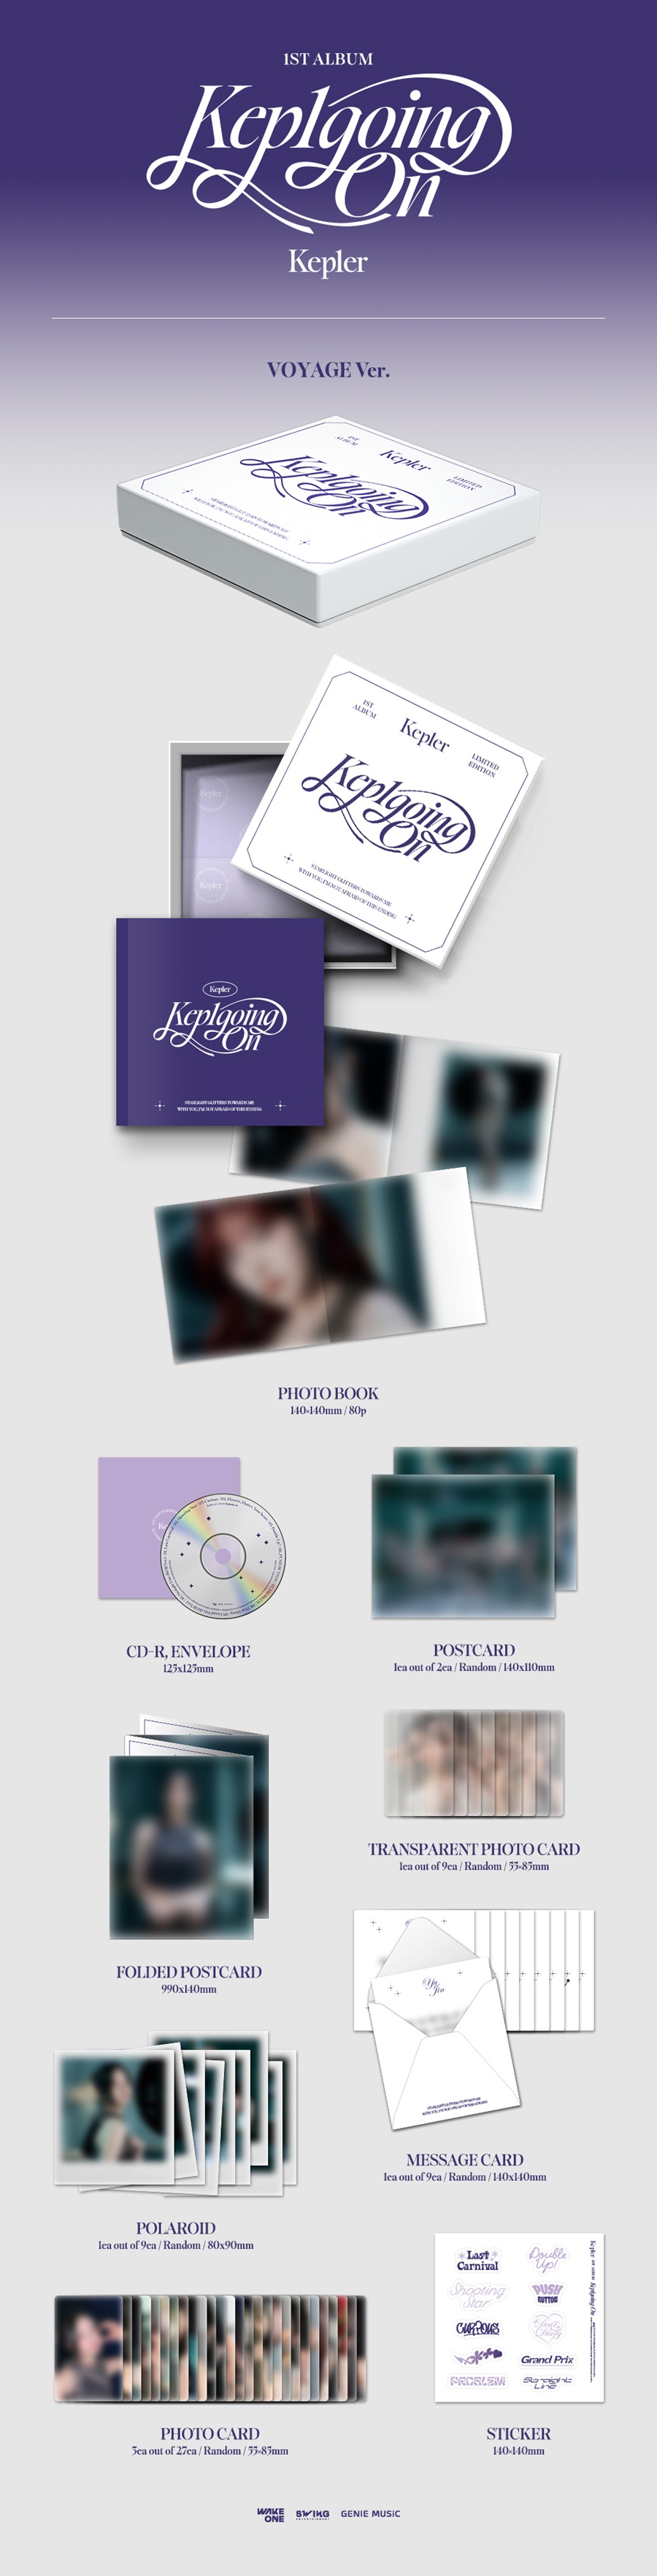 Kep1er(케플러) - 1st Album [Kep1going On] (Limited Edition VOYAGE Ver.)